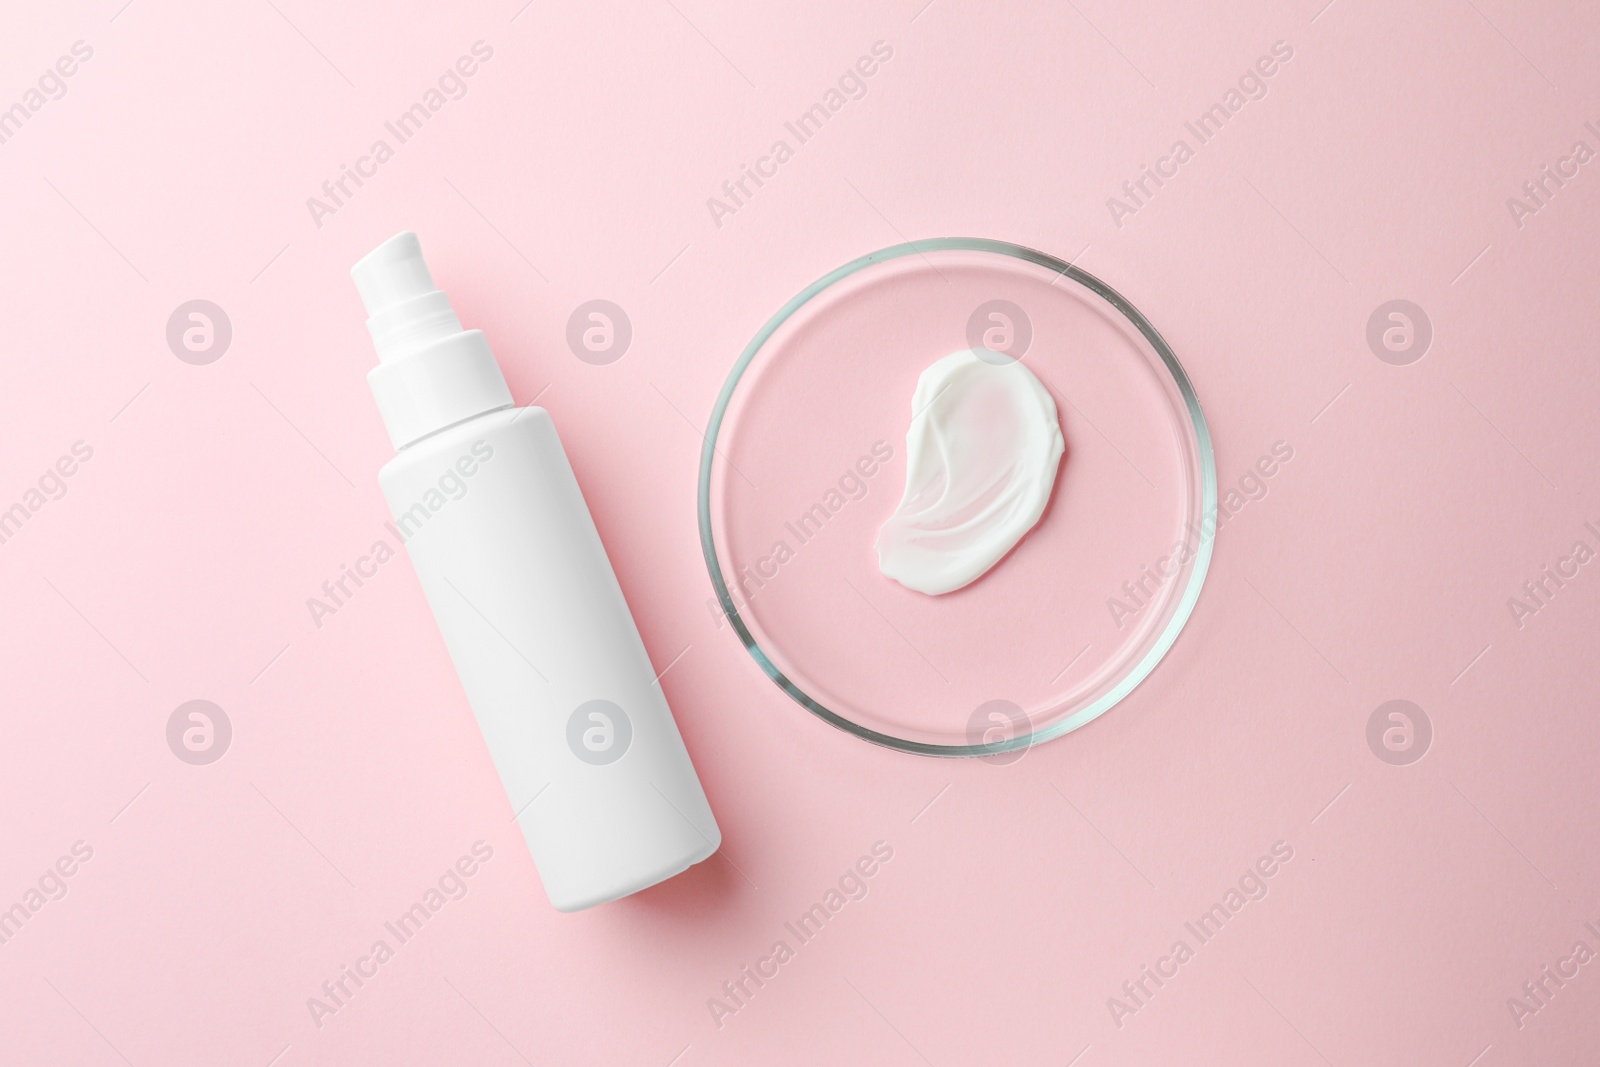 Photo of Petri dish and cosmetic product on pink background, flat lay